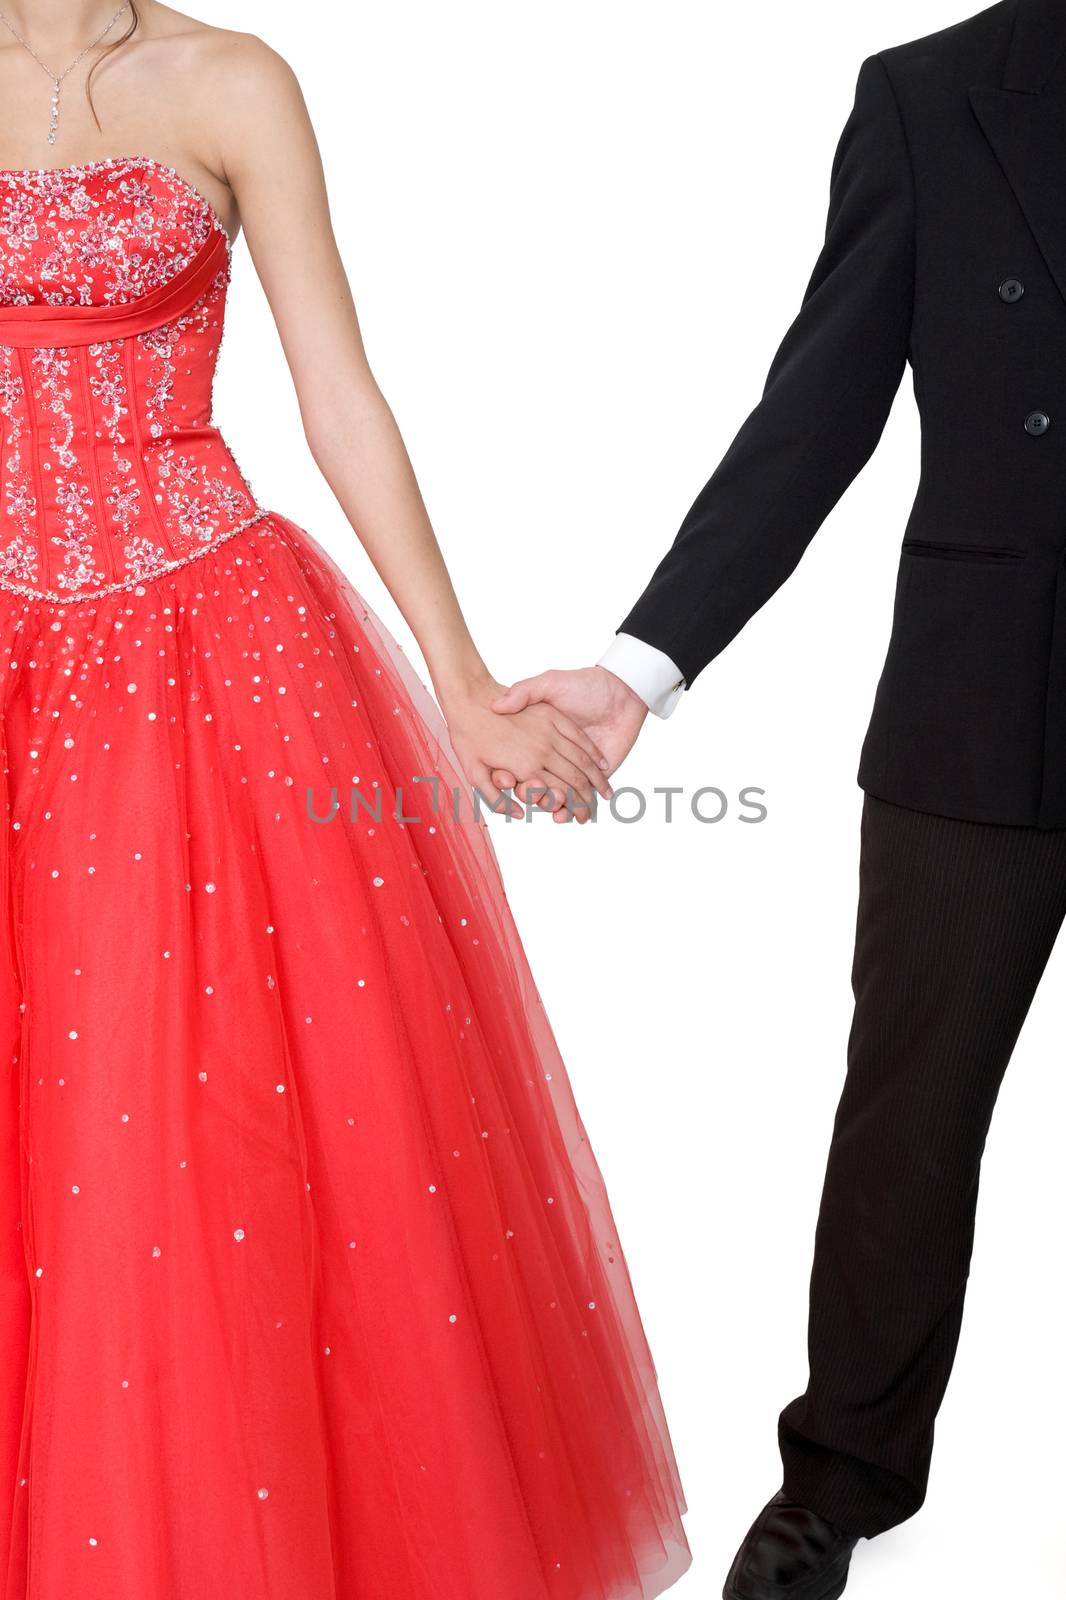 Boy & girl, in formal attire, holding hands against a white background.